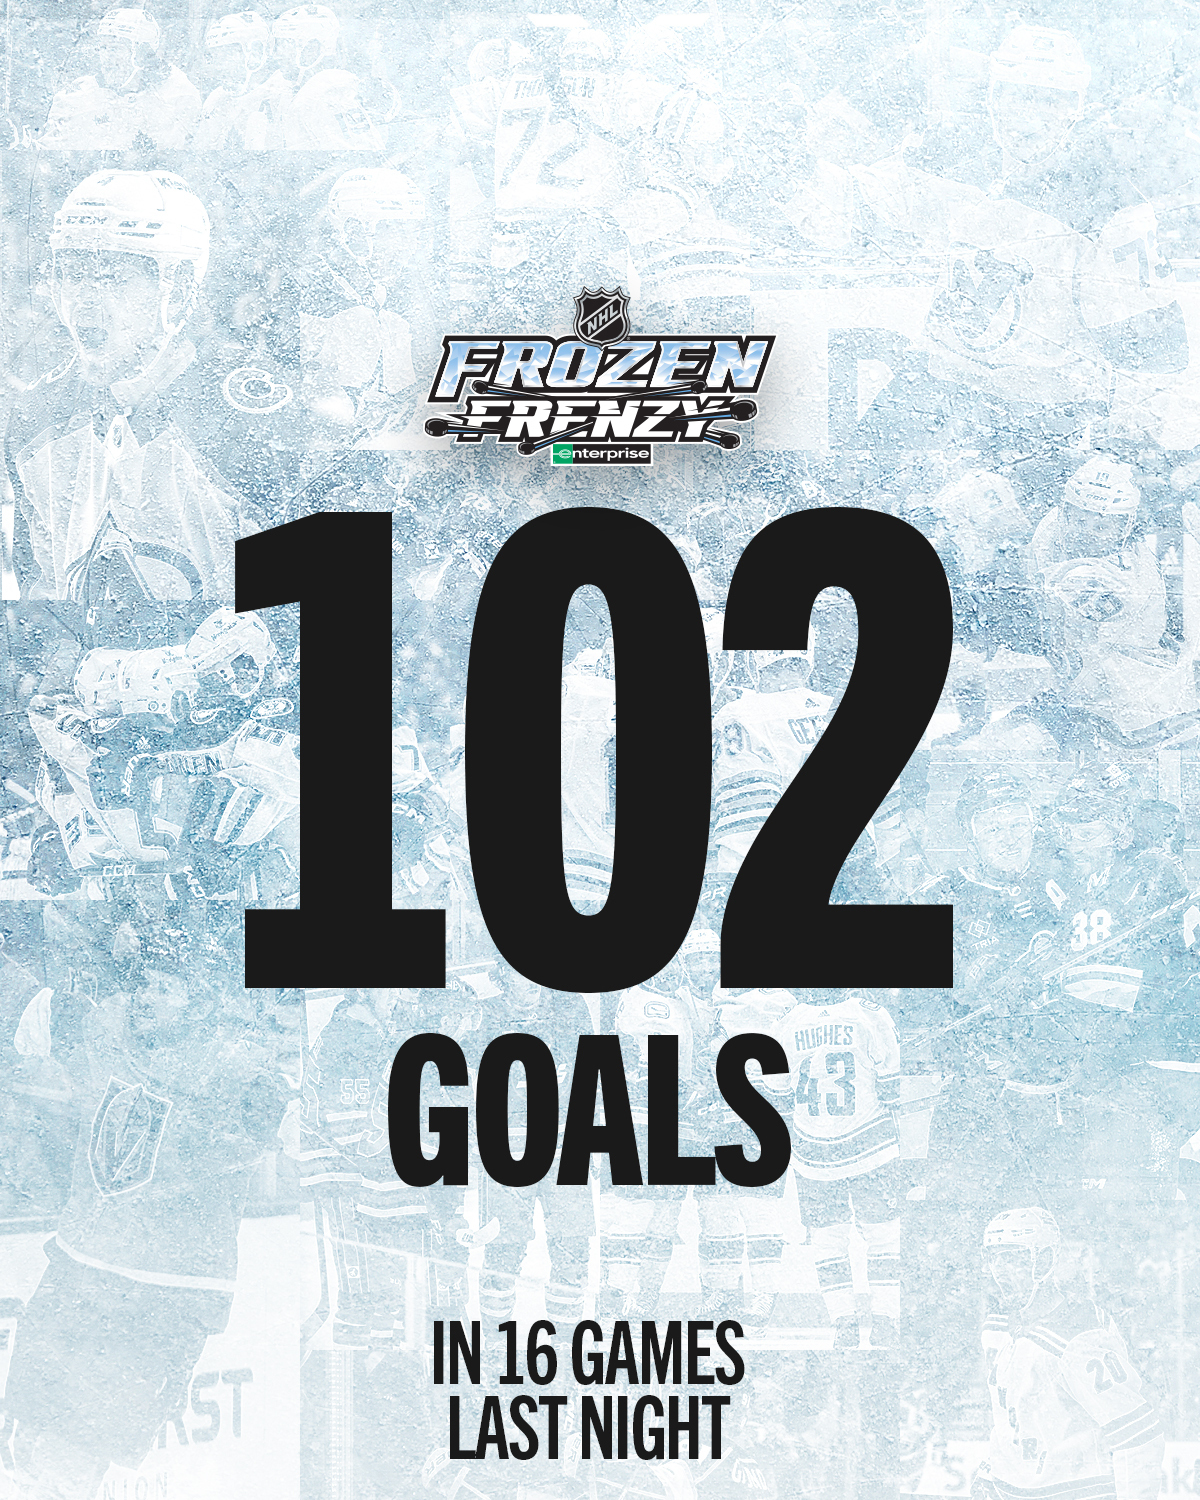 Background: Ice that is torn up with skate marks with celebration photos from different teams who scored last night. Middle: Enterprise's Frozen Frenzy logo above large black text reading, "102 goals". Bottom: Black text reading, "In 16 games last night".